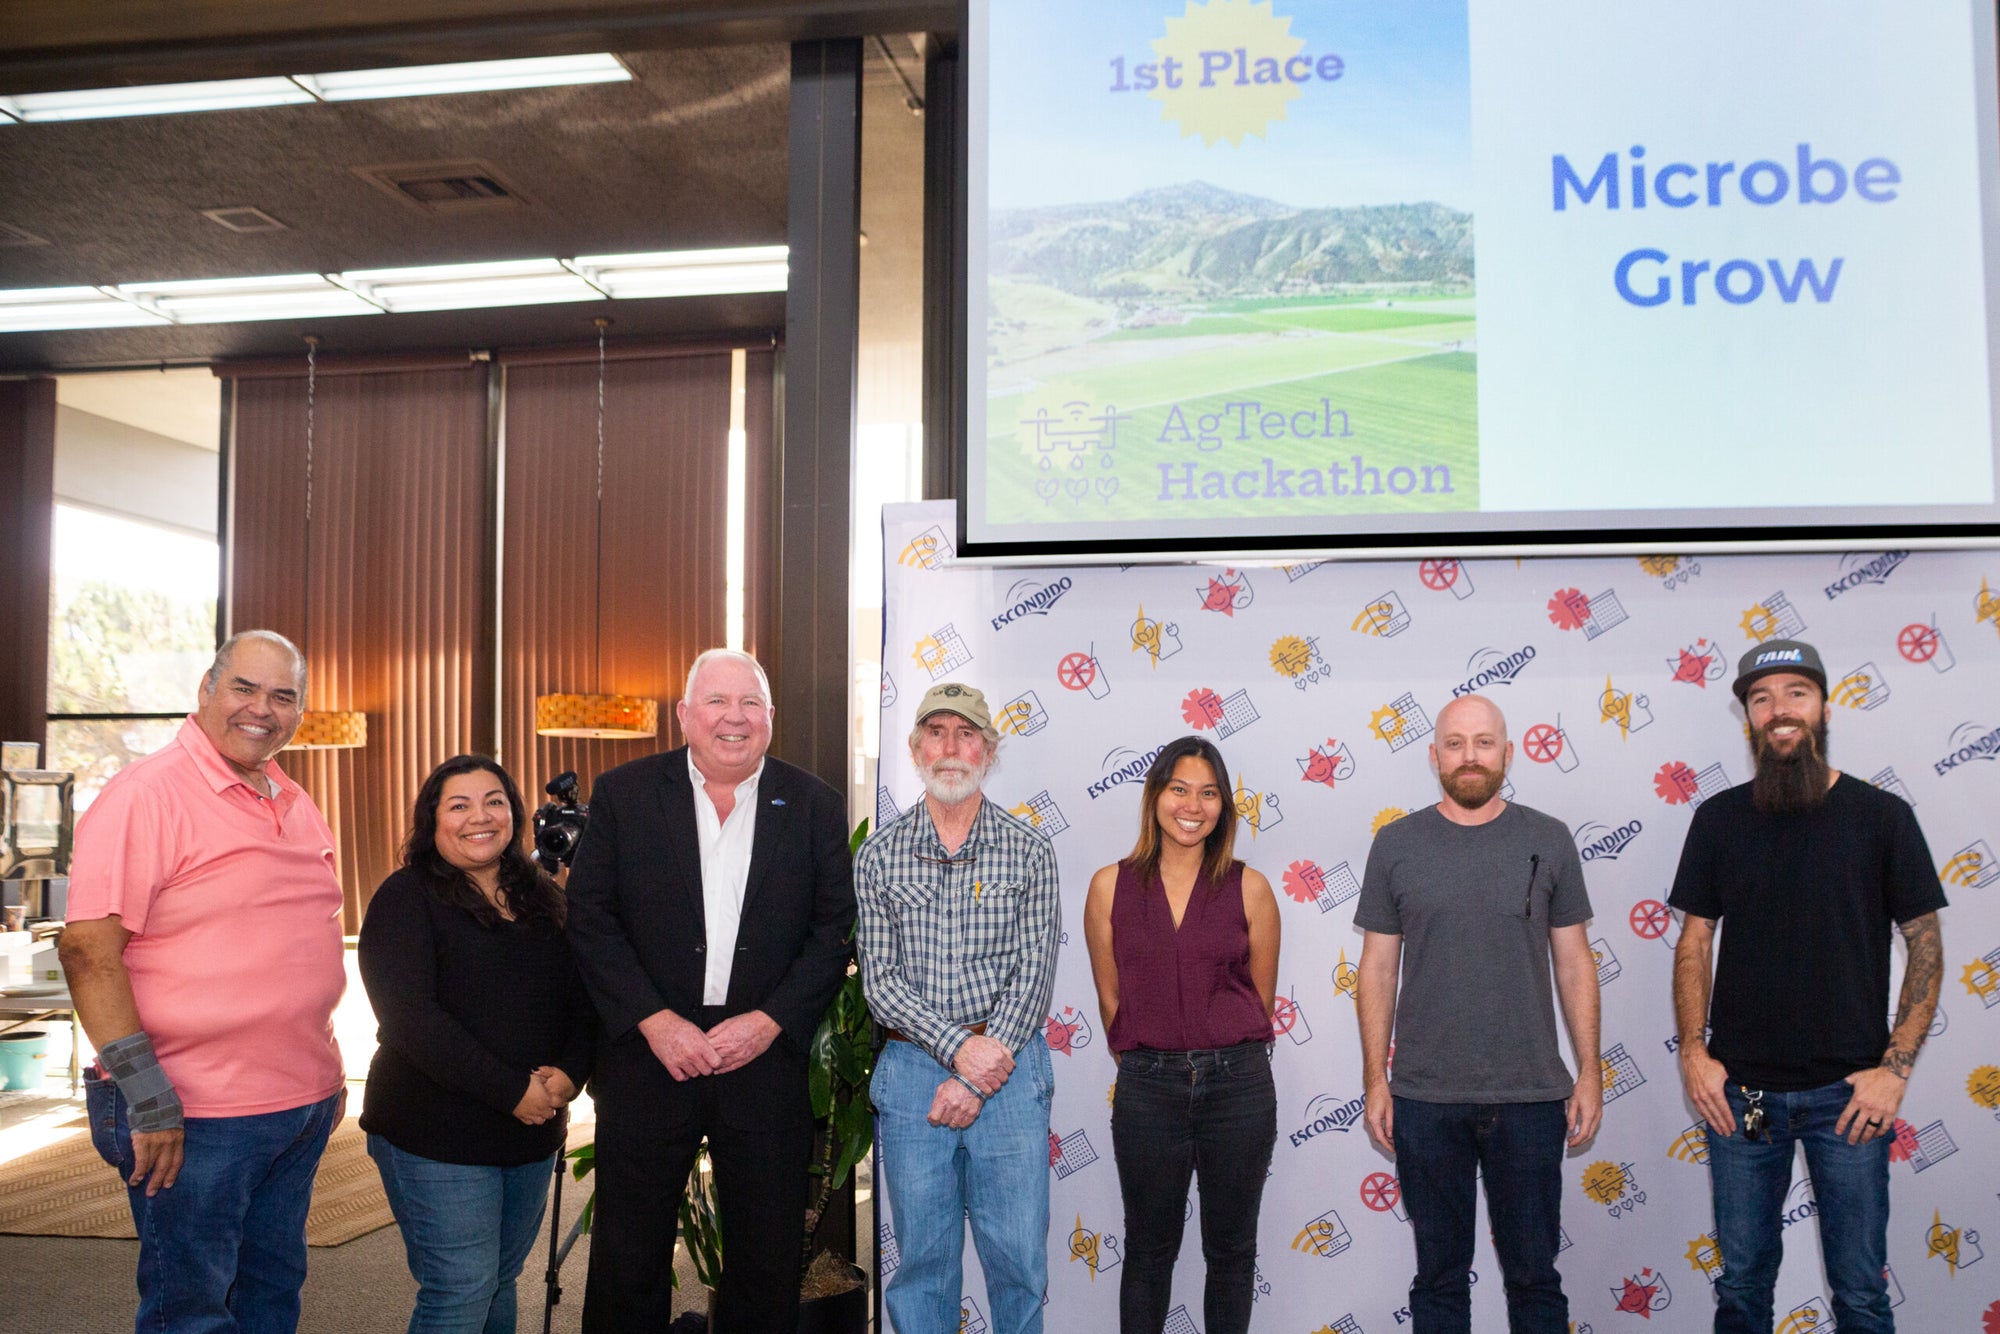 Microbe Grow Places First At Escondido AgTech Hackathon